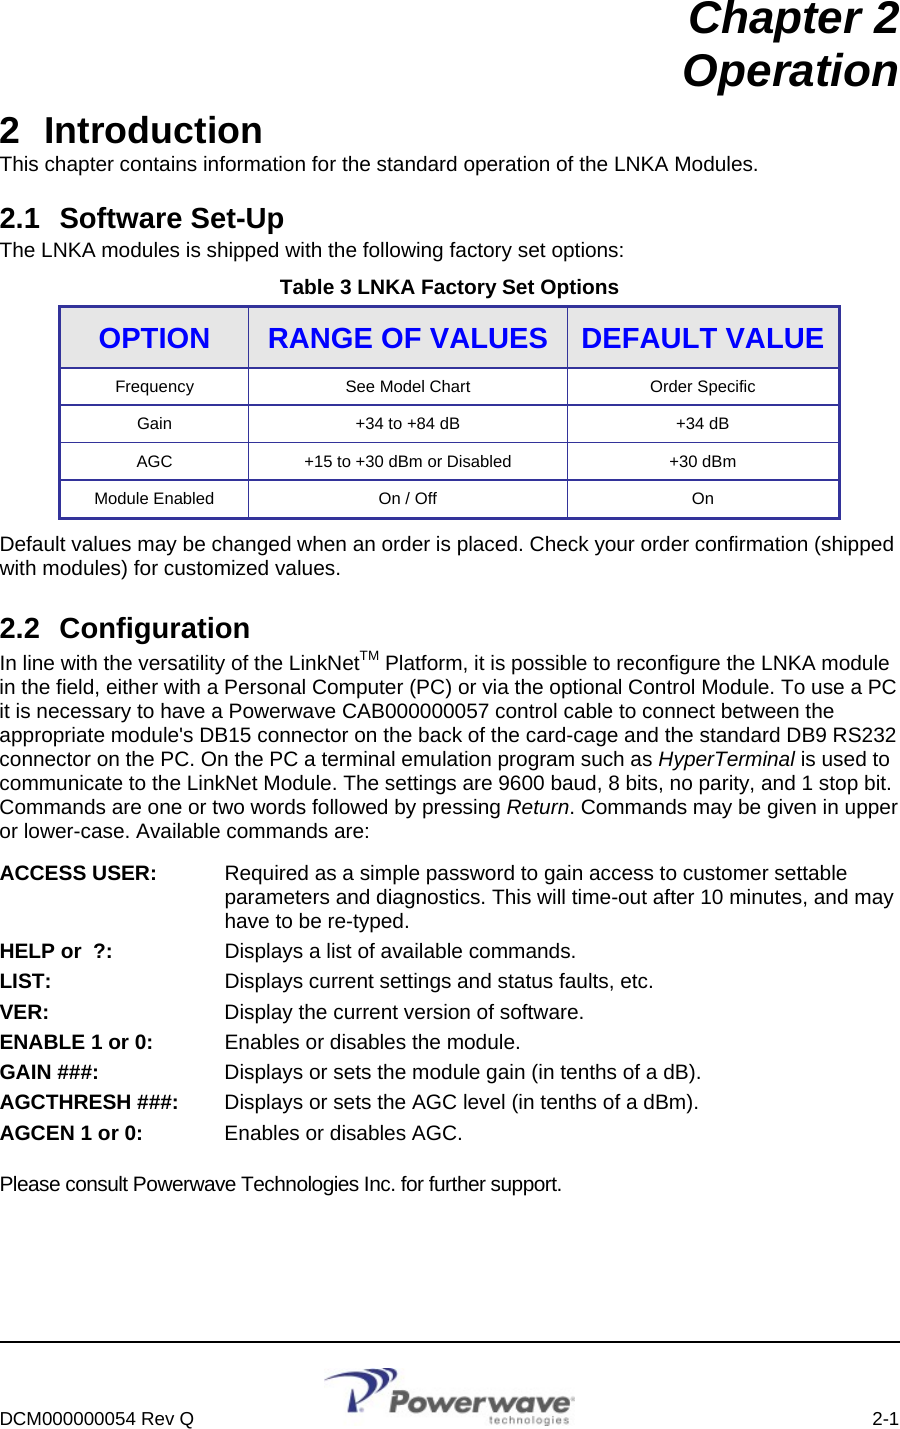     DCM000000054 Rev Q    2-1  Chapter 2 Operation 2 Introduction This chapter contains information for the standard operation of the LNKA Modules. 2.1 Software Set-Up The LNKA modules is shipped with the following factory set options: Table 3 LNKA Factory Set Options OPTION  RANGE OF VALUES  DEFAULT VALUE Frequency  See Model Chart  Order Specific Gain +34 to +84 dB  +34 dB AGC  +15 to +30 dBm or Disabled  +30 dBm Module Enabled  On / Off  On Default values may be changed when an order is placed. Check your order confirmation (shipped with modules) for customized values.  2.2 Configuration In line with the versatility of the LinkNetTM Platform, it is possible to reconfigure the LNKA module in the field, either with a Personal Computer (PC) or via the optional Control Module. To use a PC it is necessary to have a Powerwave CAB000000057 control cable to connect between the appropriate module&apos;s DB15 connector on the back of the card-cage and the standard DB9 RS232 connector on the PC. On the PC a terminal emulation program such as HyperTerminal is used to communicate to the LinkNet Module. The settings are 9600 baud, 8 bits, no parity, and 1 stop bit. Commands are one or two words followed by pressing Return. Commands may be given in upper or lower-case. Available commands are: ACCESS USER:  Required as a simple password to gain access to customer settable parameters and diagnostics. This will time-out after 10 minutes, and may have to be re-typed. HELP or  ?:  Displays a list of available commands. LIST:  Displays current settings and status faults, etc. VER:  Display the current version of software. ENABLE 1 or 0:  Enables or disables the module. GAIN ###:  Displays or sets the module gain (in tenths of a dB). AGCTHRESH ###:  Displays or sets the AGC level (in tenths of a dBm). AGCEN 1 or 0:  Enables or disables AGC. Please consult Powerwave Technologies Inc. for further support. 